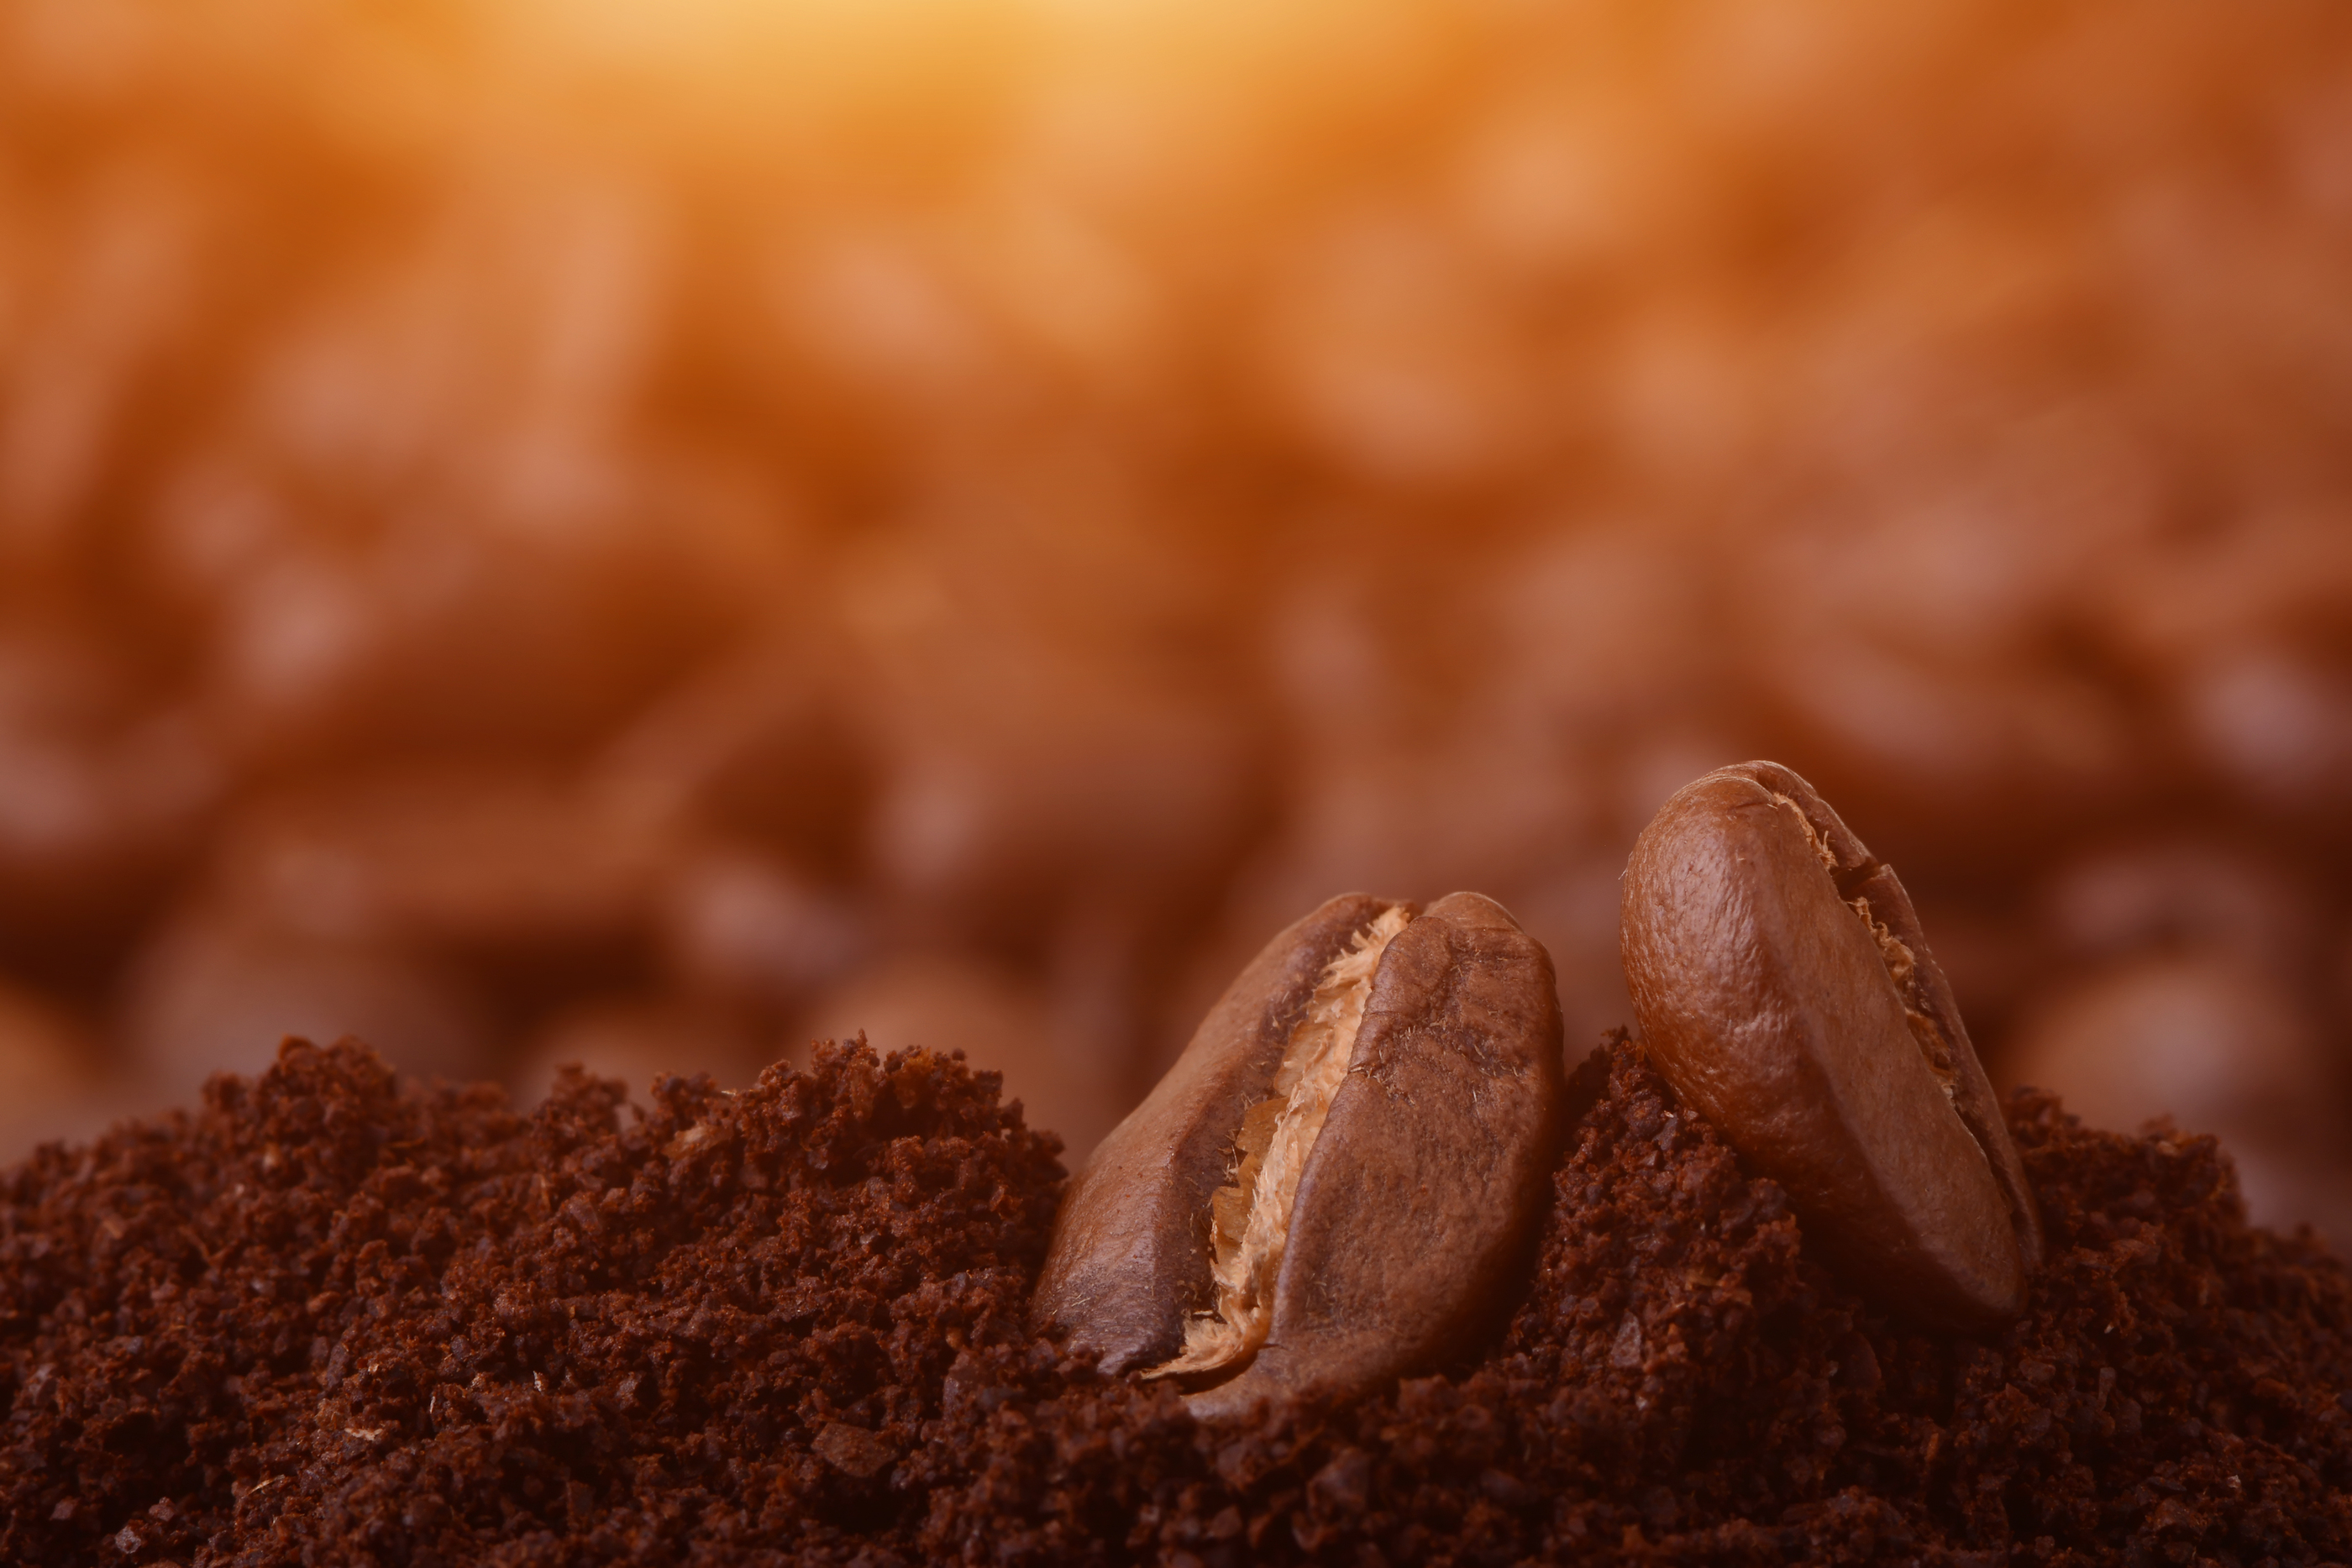 https://www.forgerecycling.co.uk/blog/wp-content/uploads/2018/11/bigstock-Closeup-Of-Coffee-Beans-At-Roa-165375467.jpg